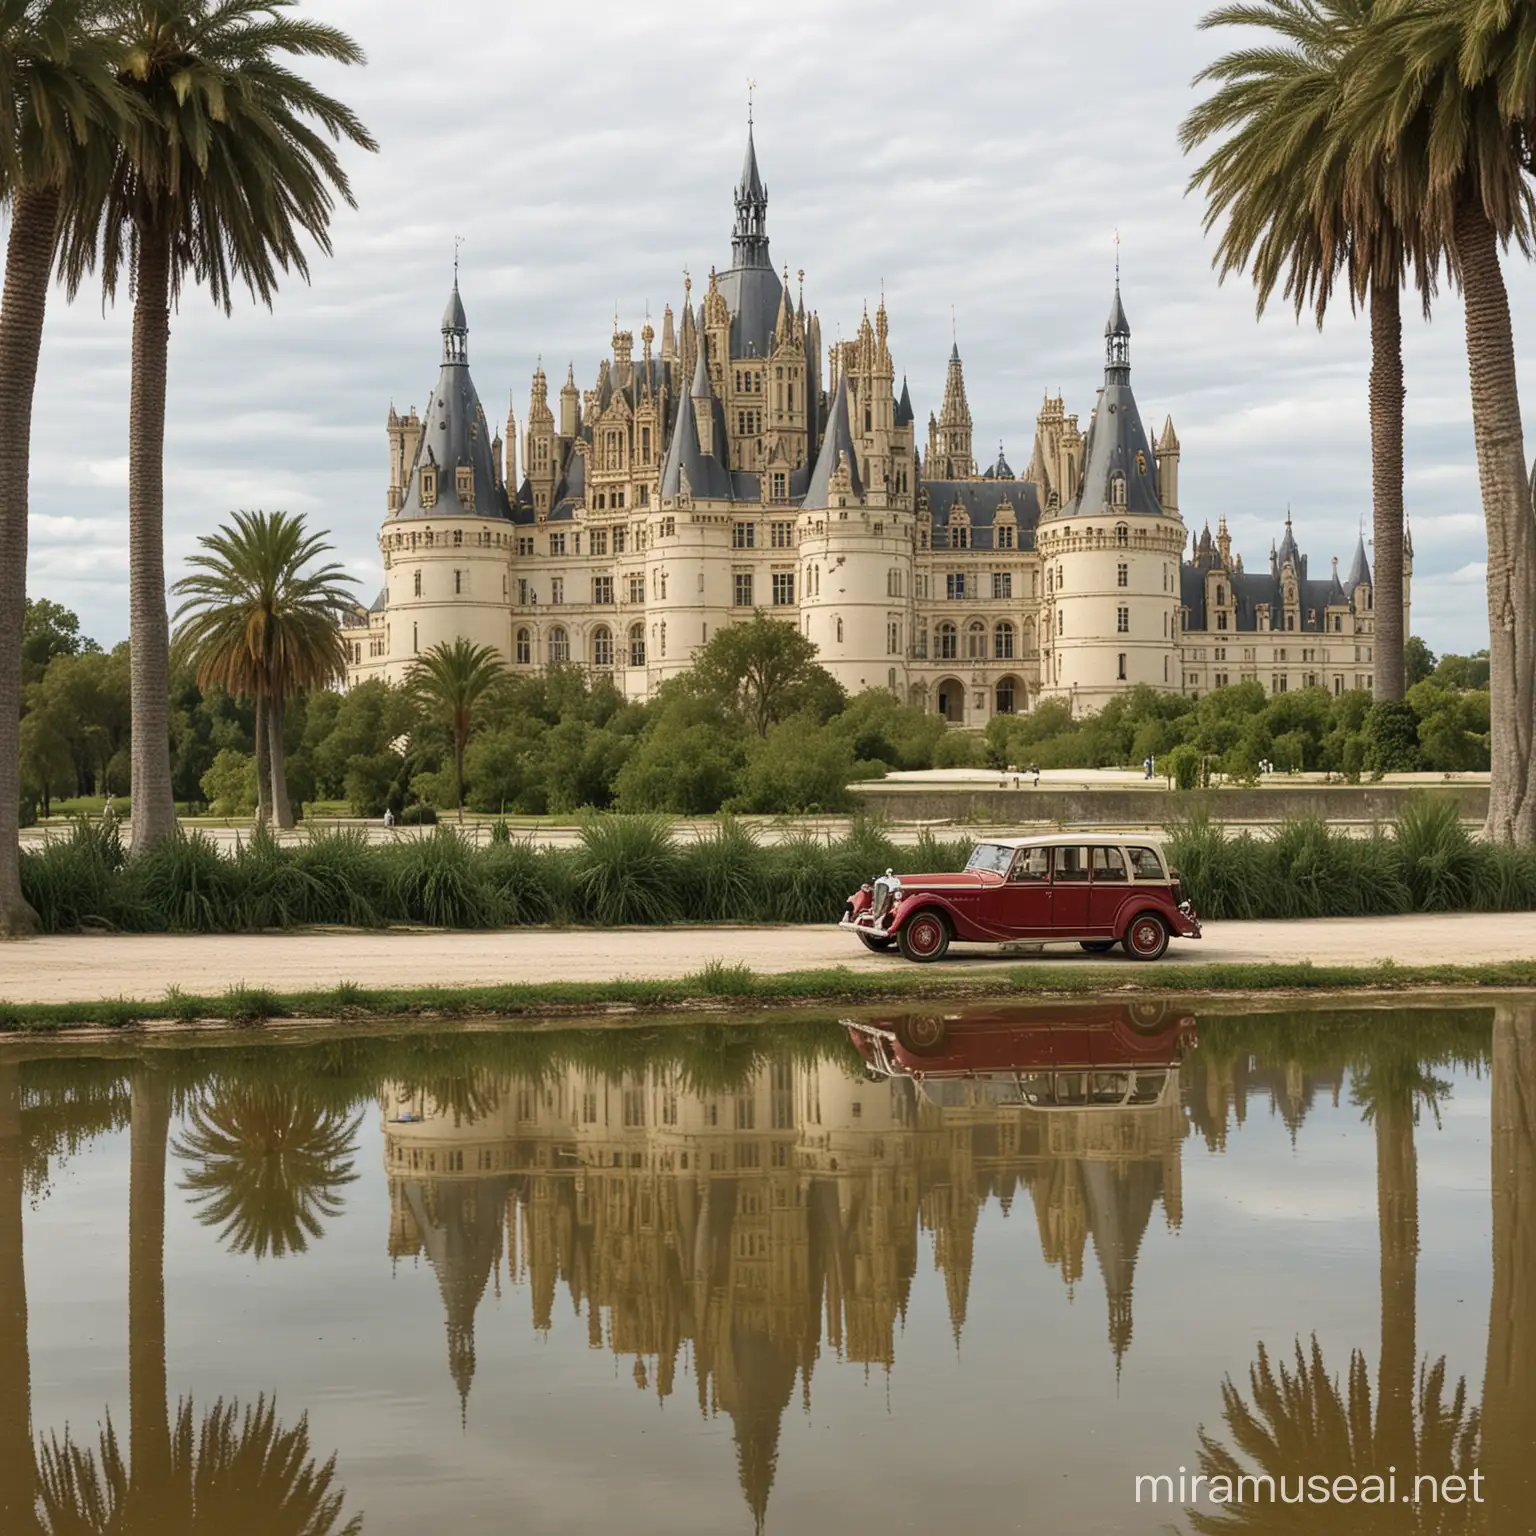 Desert Oasis with Palm Trees and Chateau de Chambord